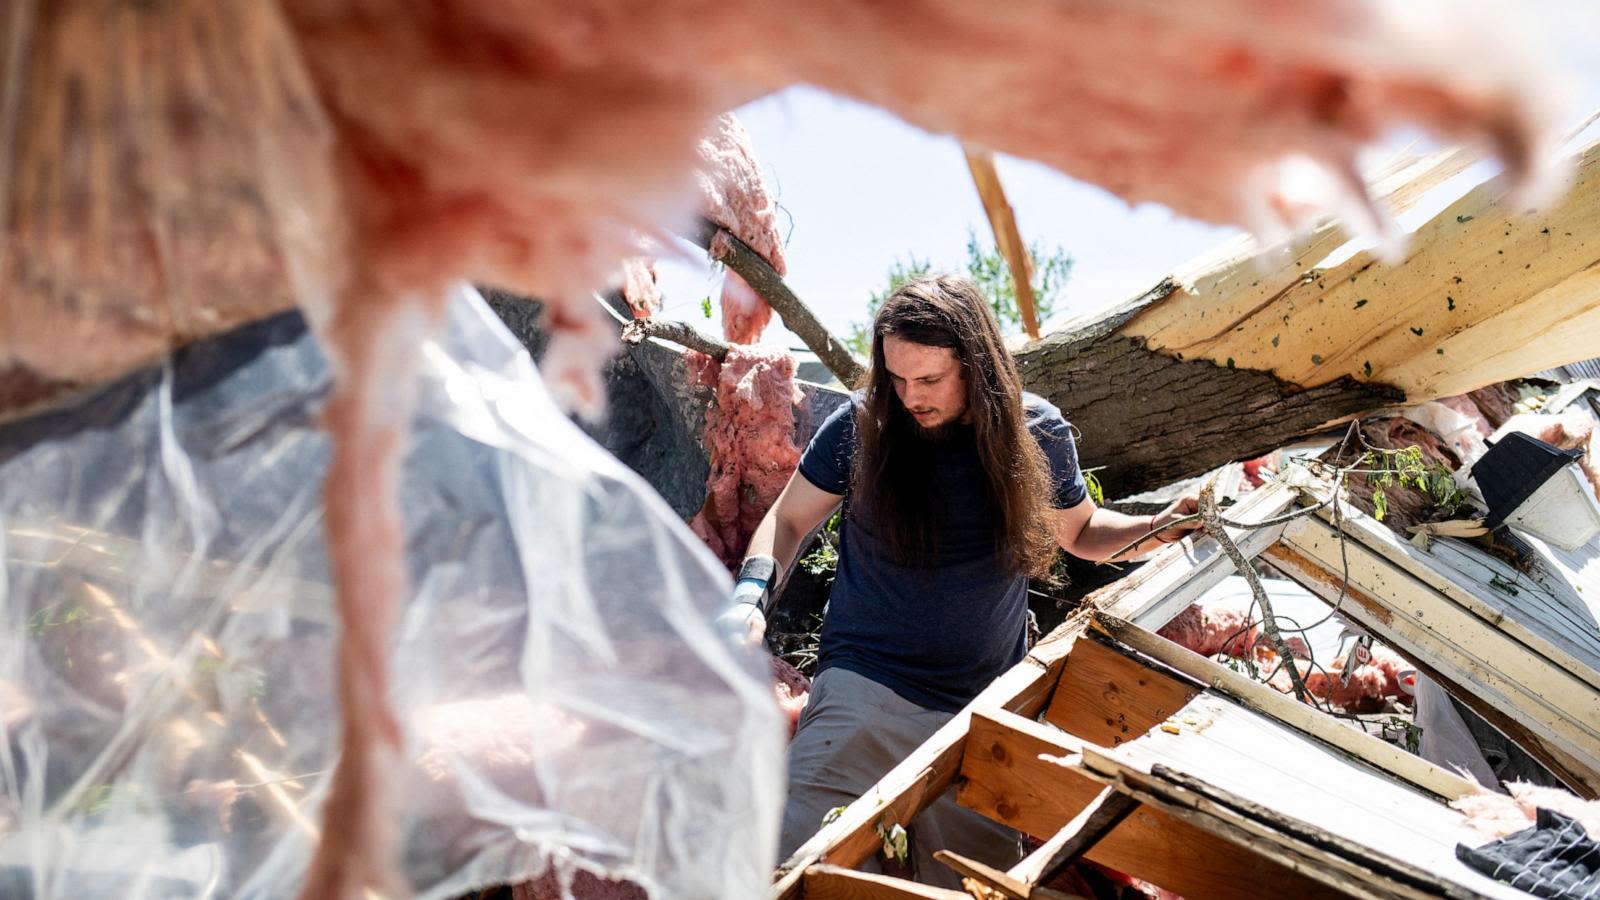 Multiple tornadoes strike across 6 states with more than 350 damaging storm reports across US